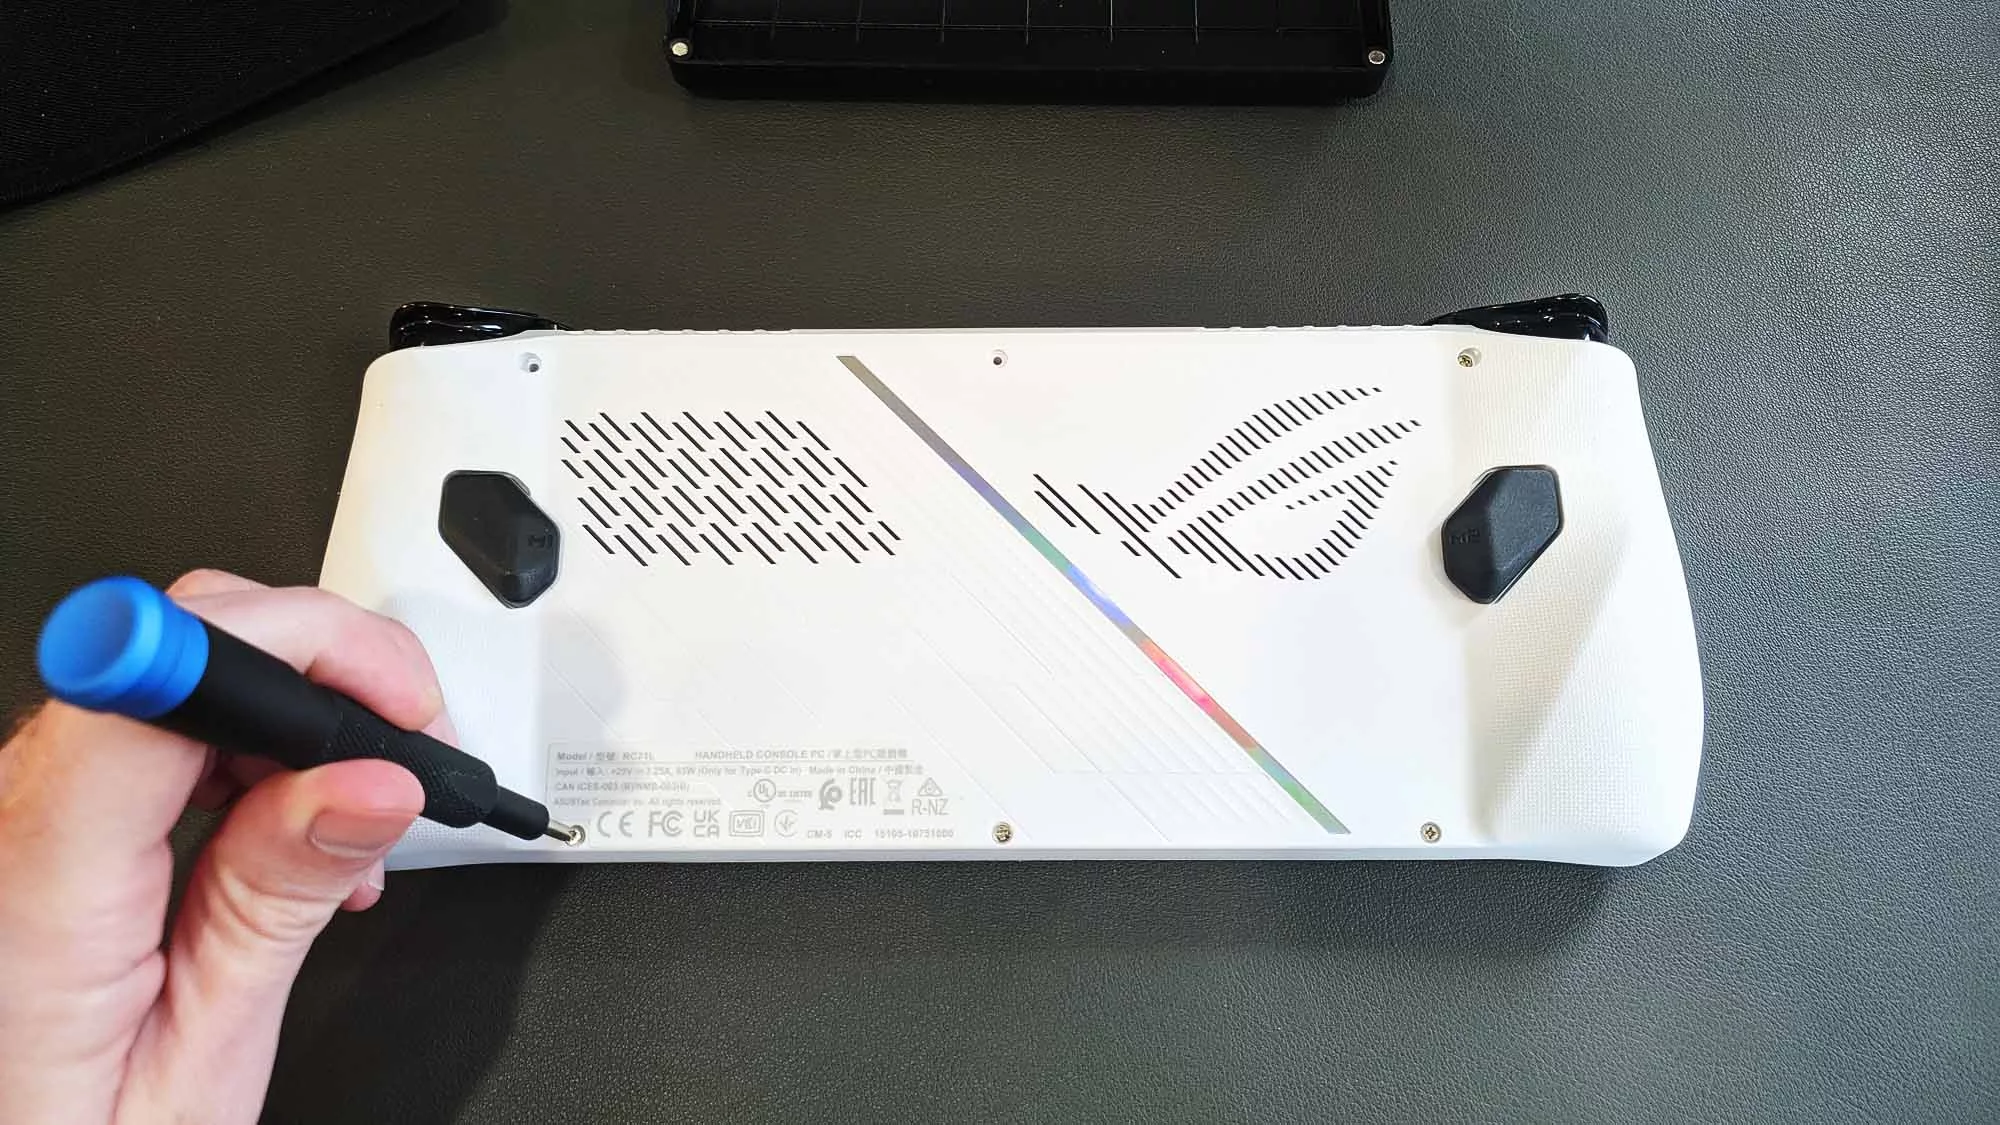 The back side of the ROG Ally, with a hand unscrewing one screw.